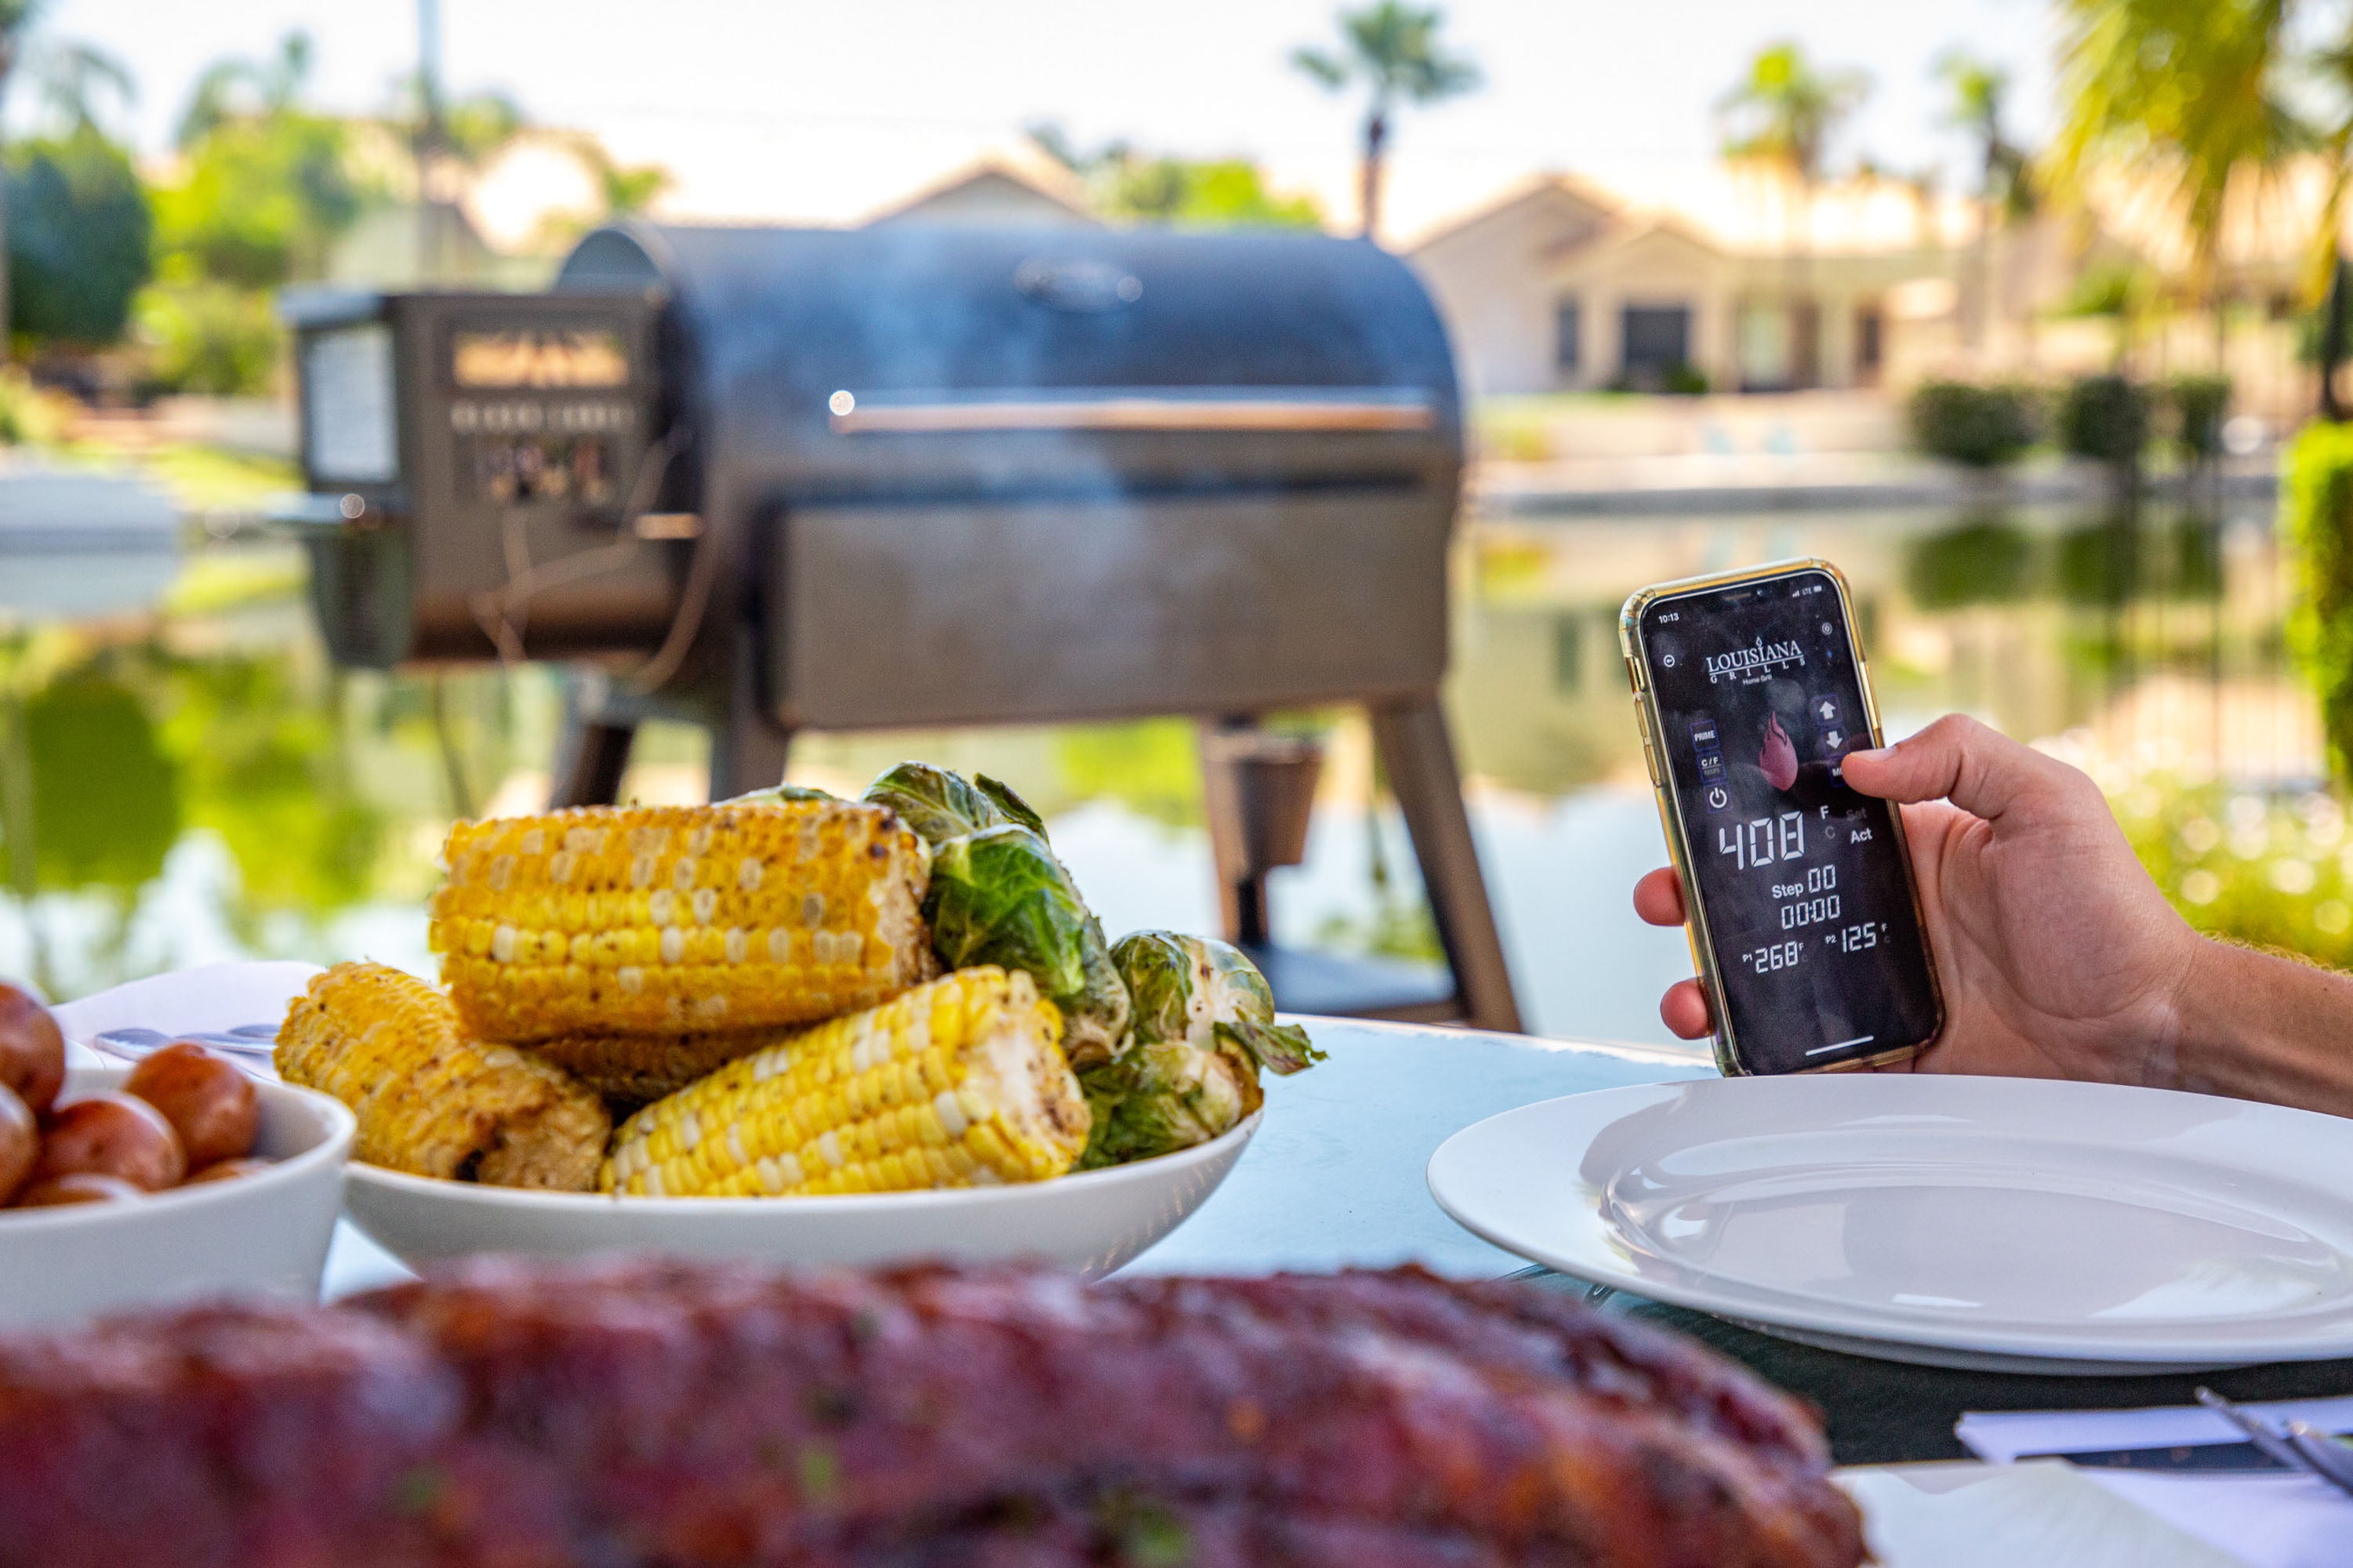 800 Black Label Series Grill with WiFi Control – Louisiana-Grills